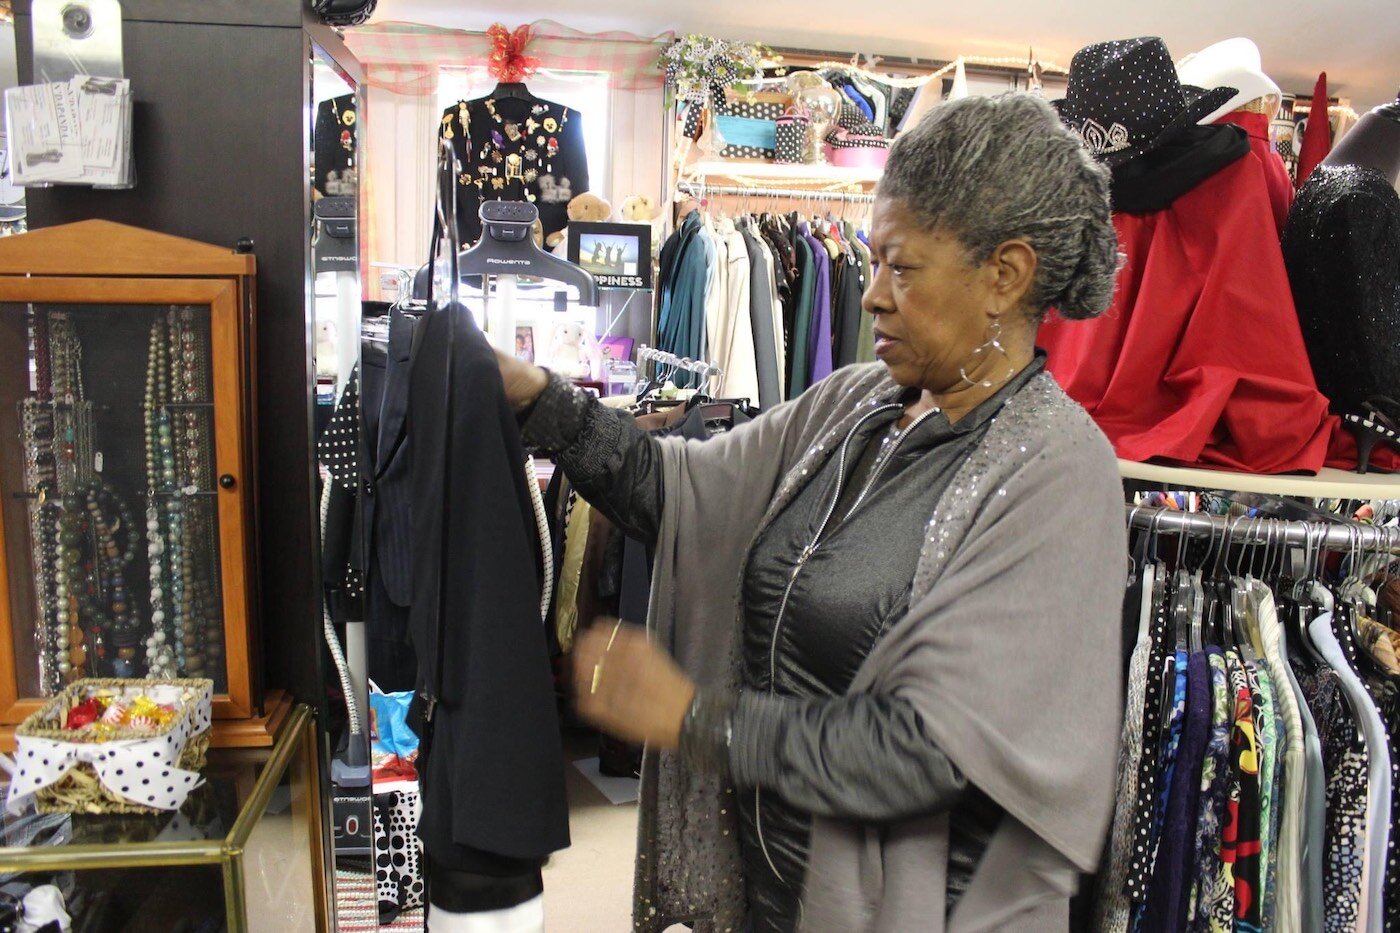 Barbara Culp, owner of N'Dpanda Consignments and Resale Shop, has been assisted by a Restart Flint grant.